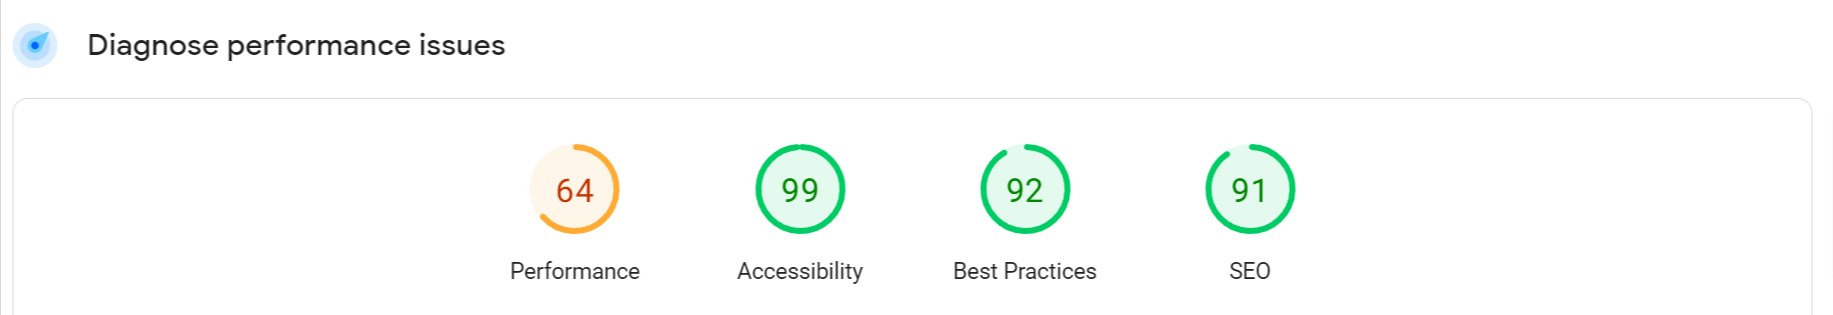 Scores for Performance, Accessibility, Best Practices, and SEO